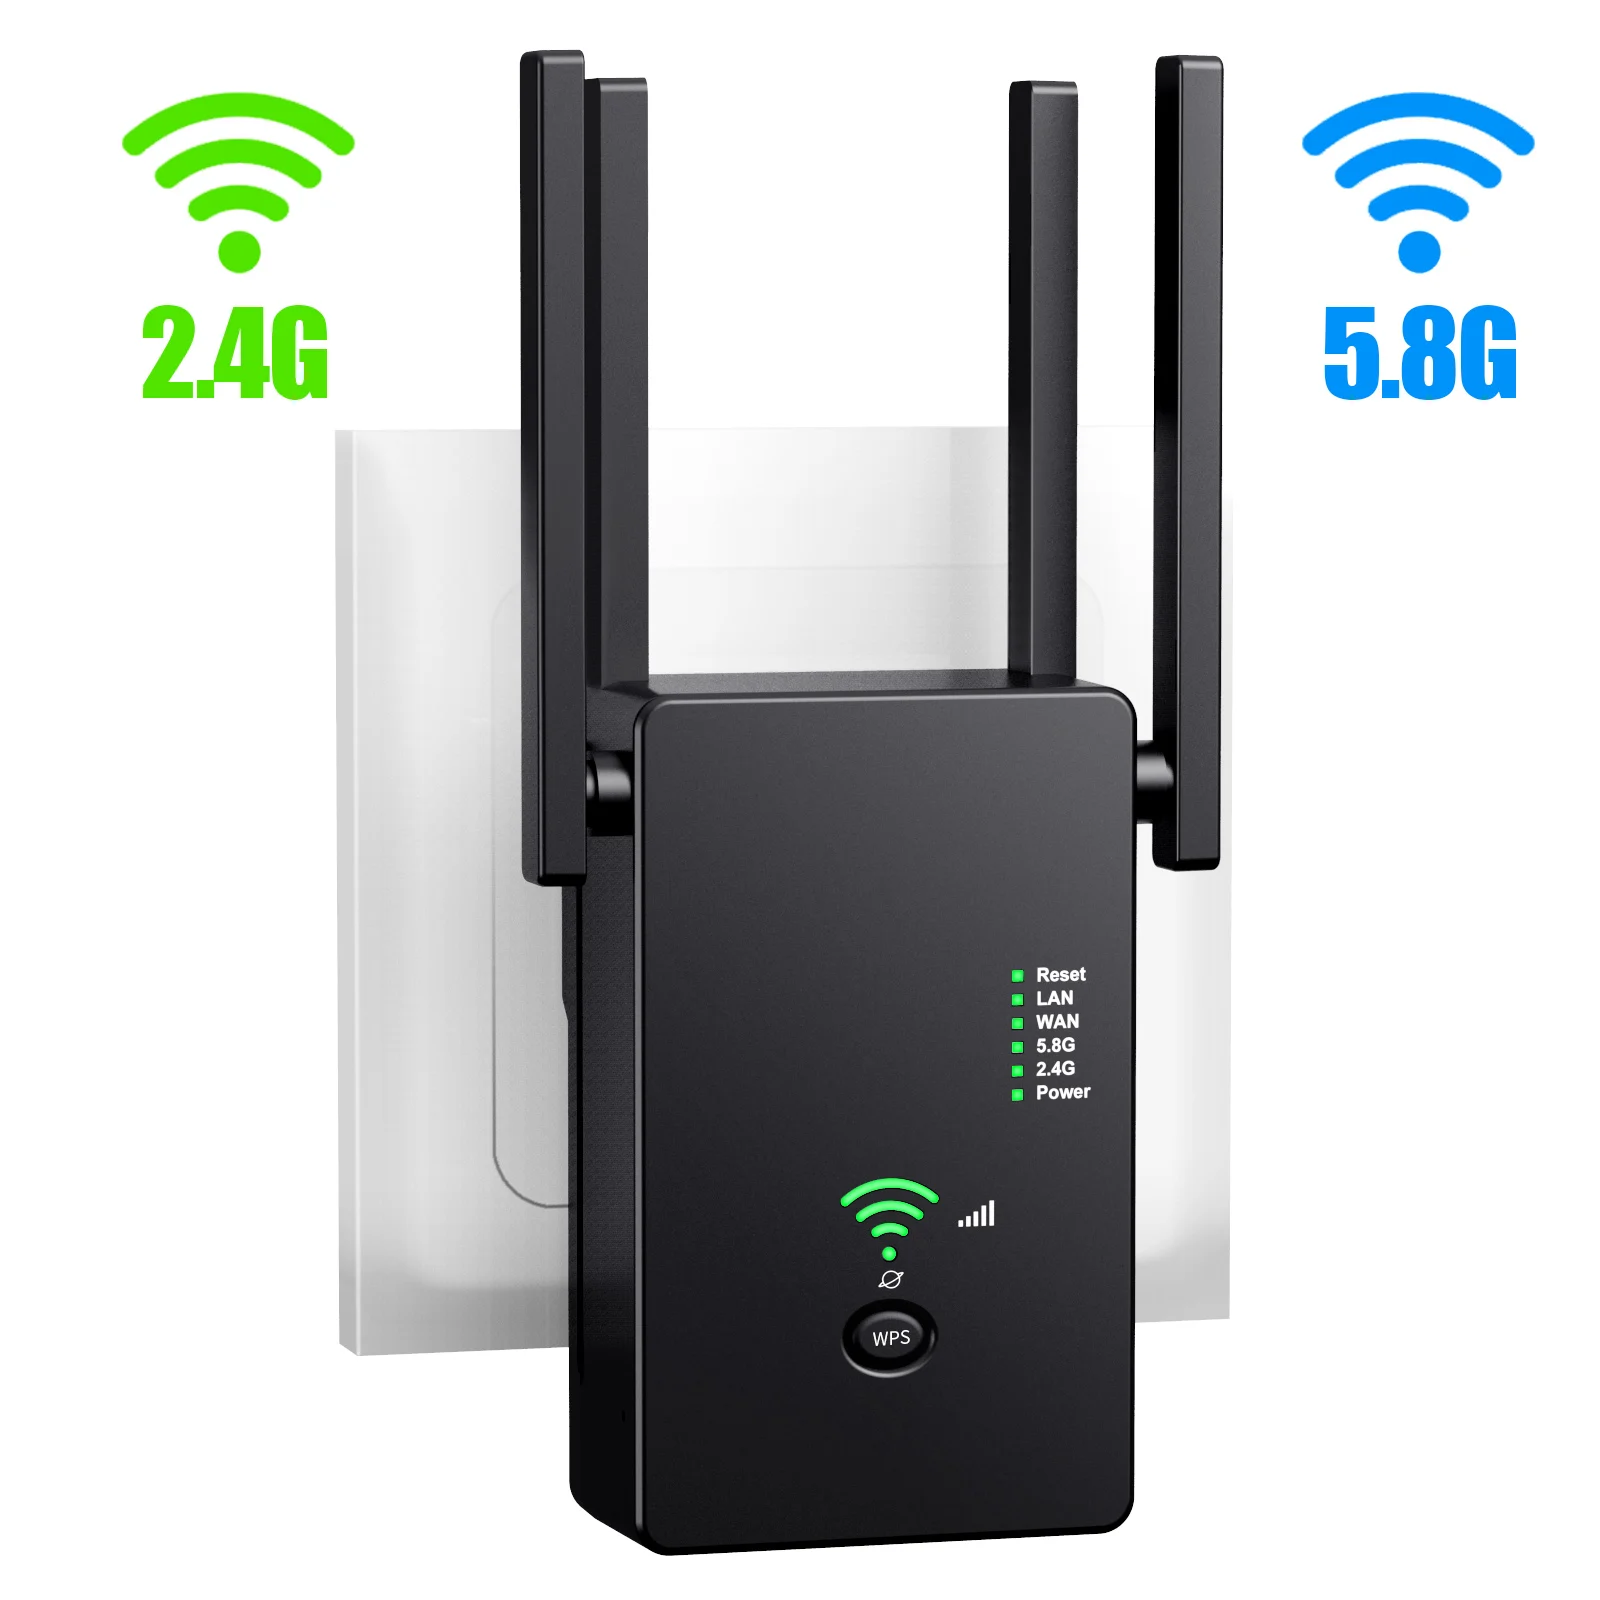 Support Repeater/Router/AP Mode White 2.4 & 5GHz Dual Band Signal Booster WiFi Range Extender 1200Mbps WiFi Extender Internet Booster up to 3000sq.ft 